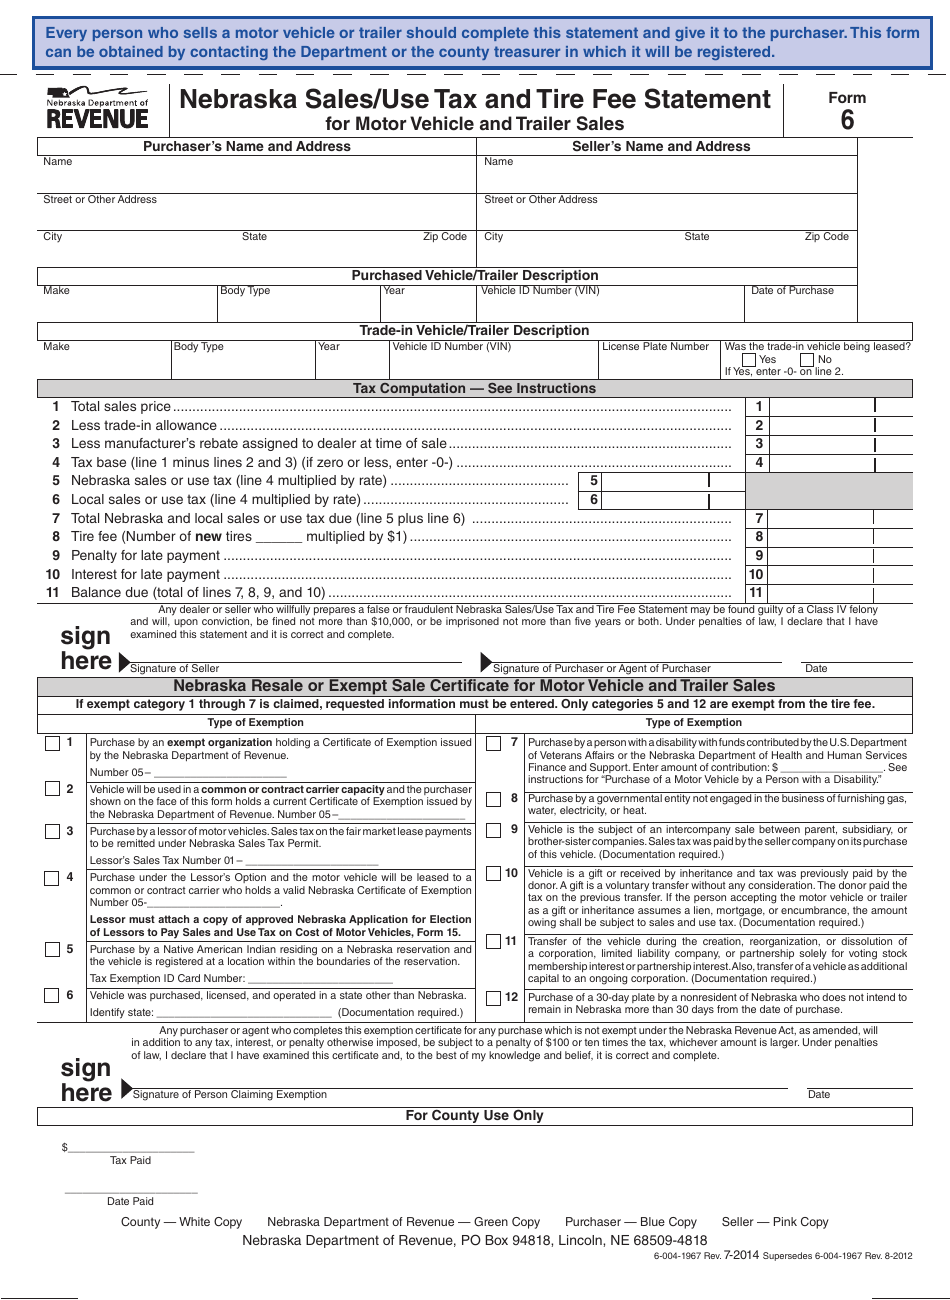 Form 6 Nebraska Sales / Use Tax and Tire Fee Statement for Motor Vehicle and Trailer Sales - Nebraska, Page 1